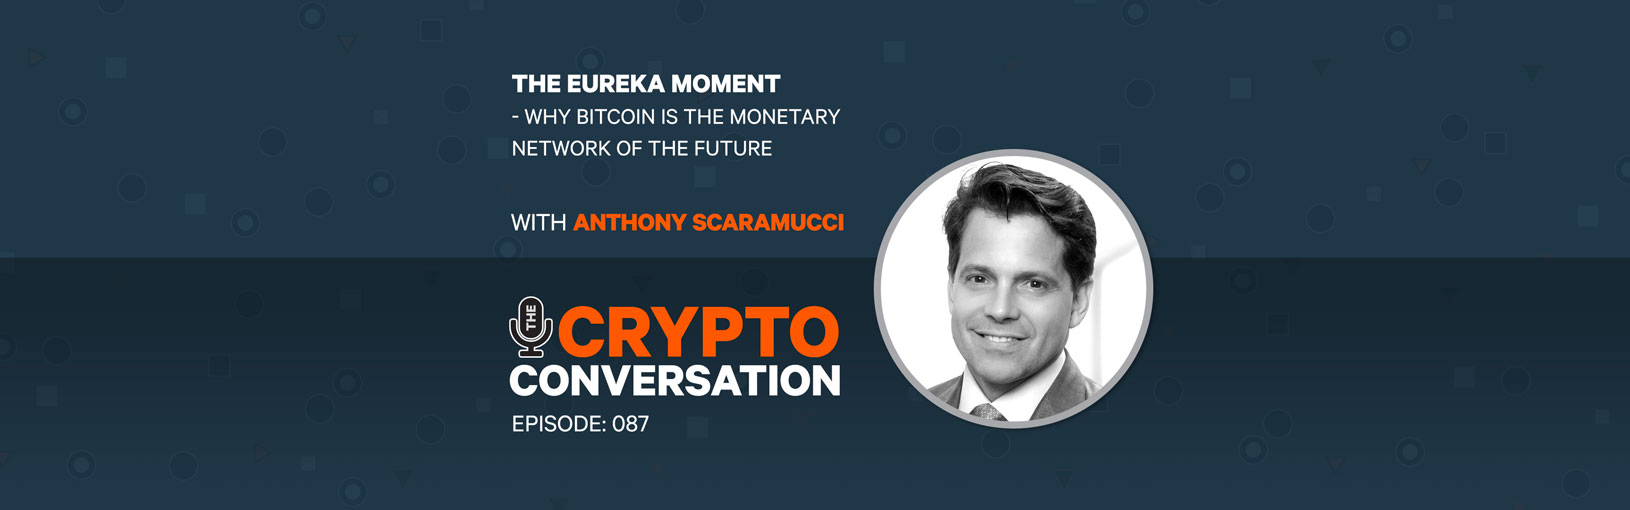 Anthony Scaramucci – Why Bitcoin is the Monetary Network of the Future